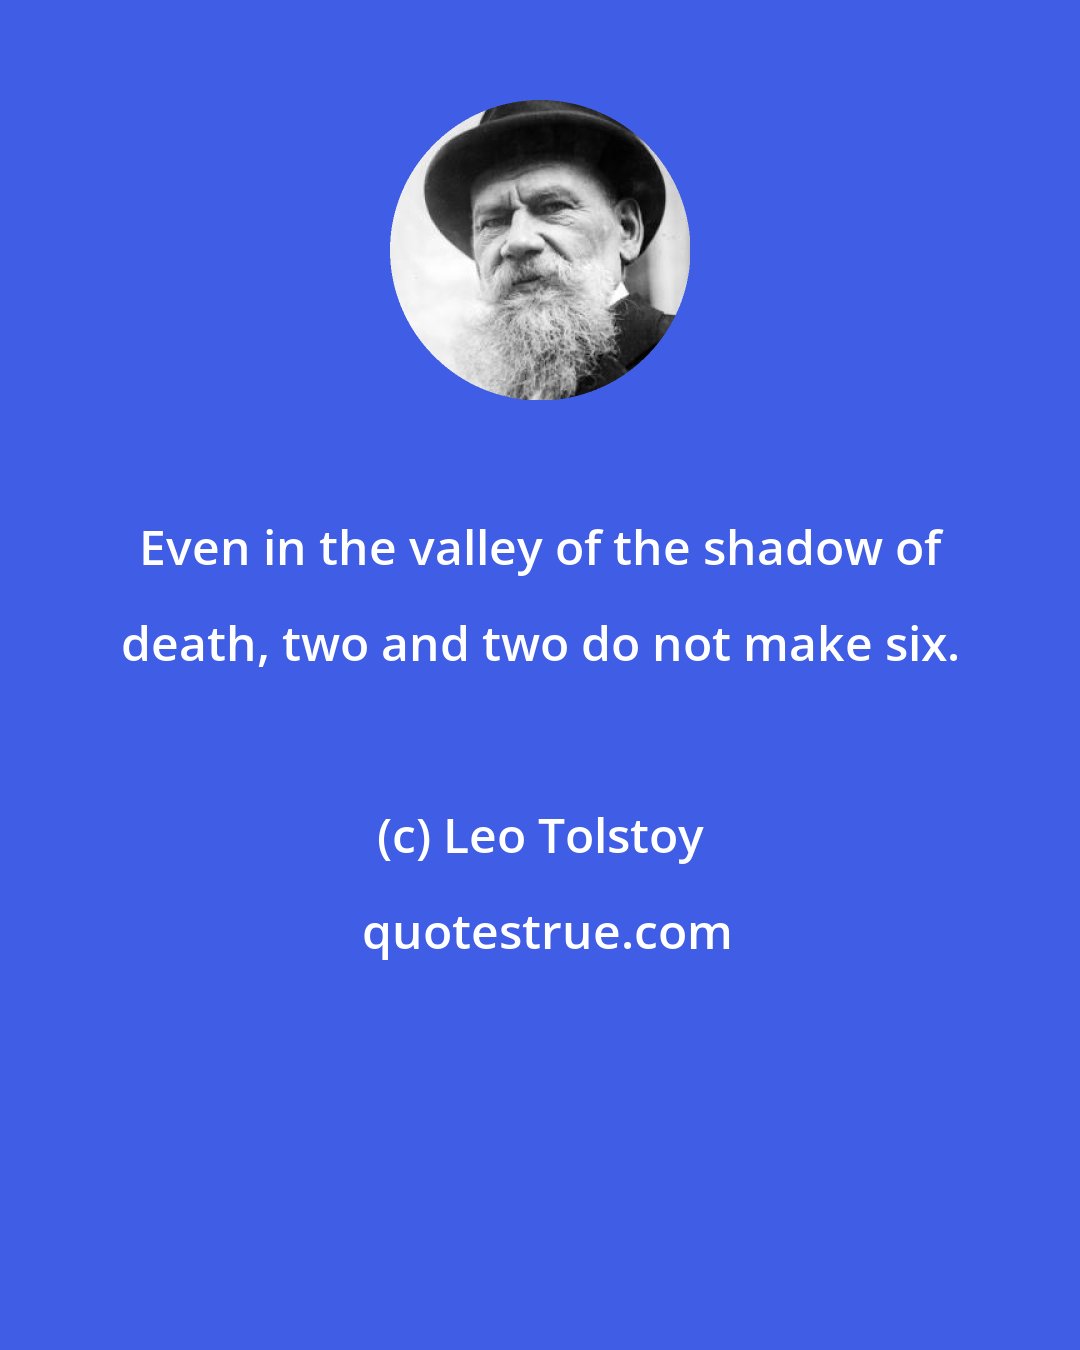 Leo Tolstoy: Even in the valley of the shadow of death, two and two do not make six.